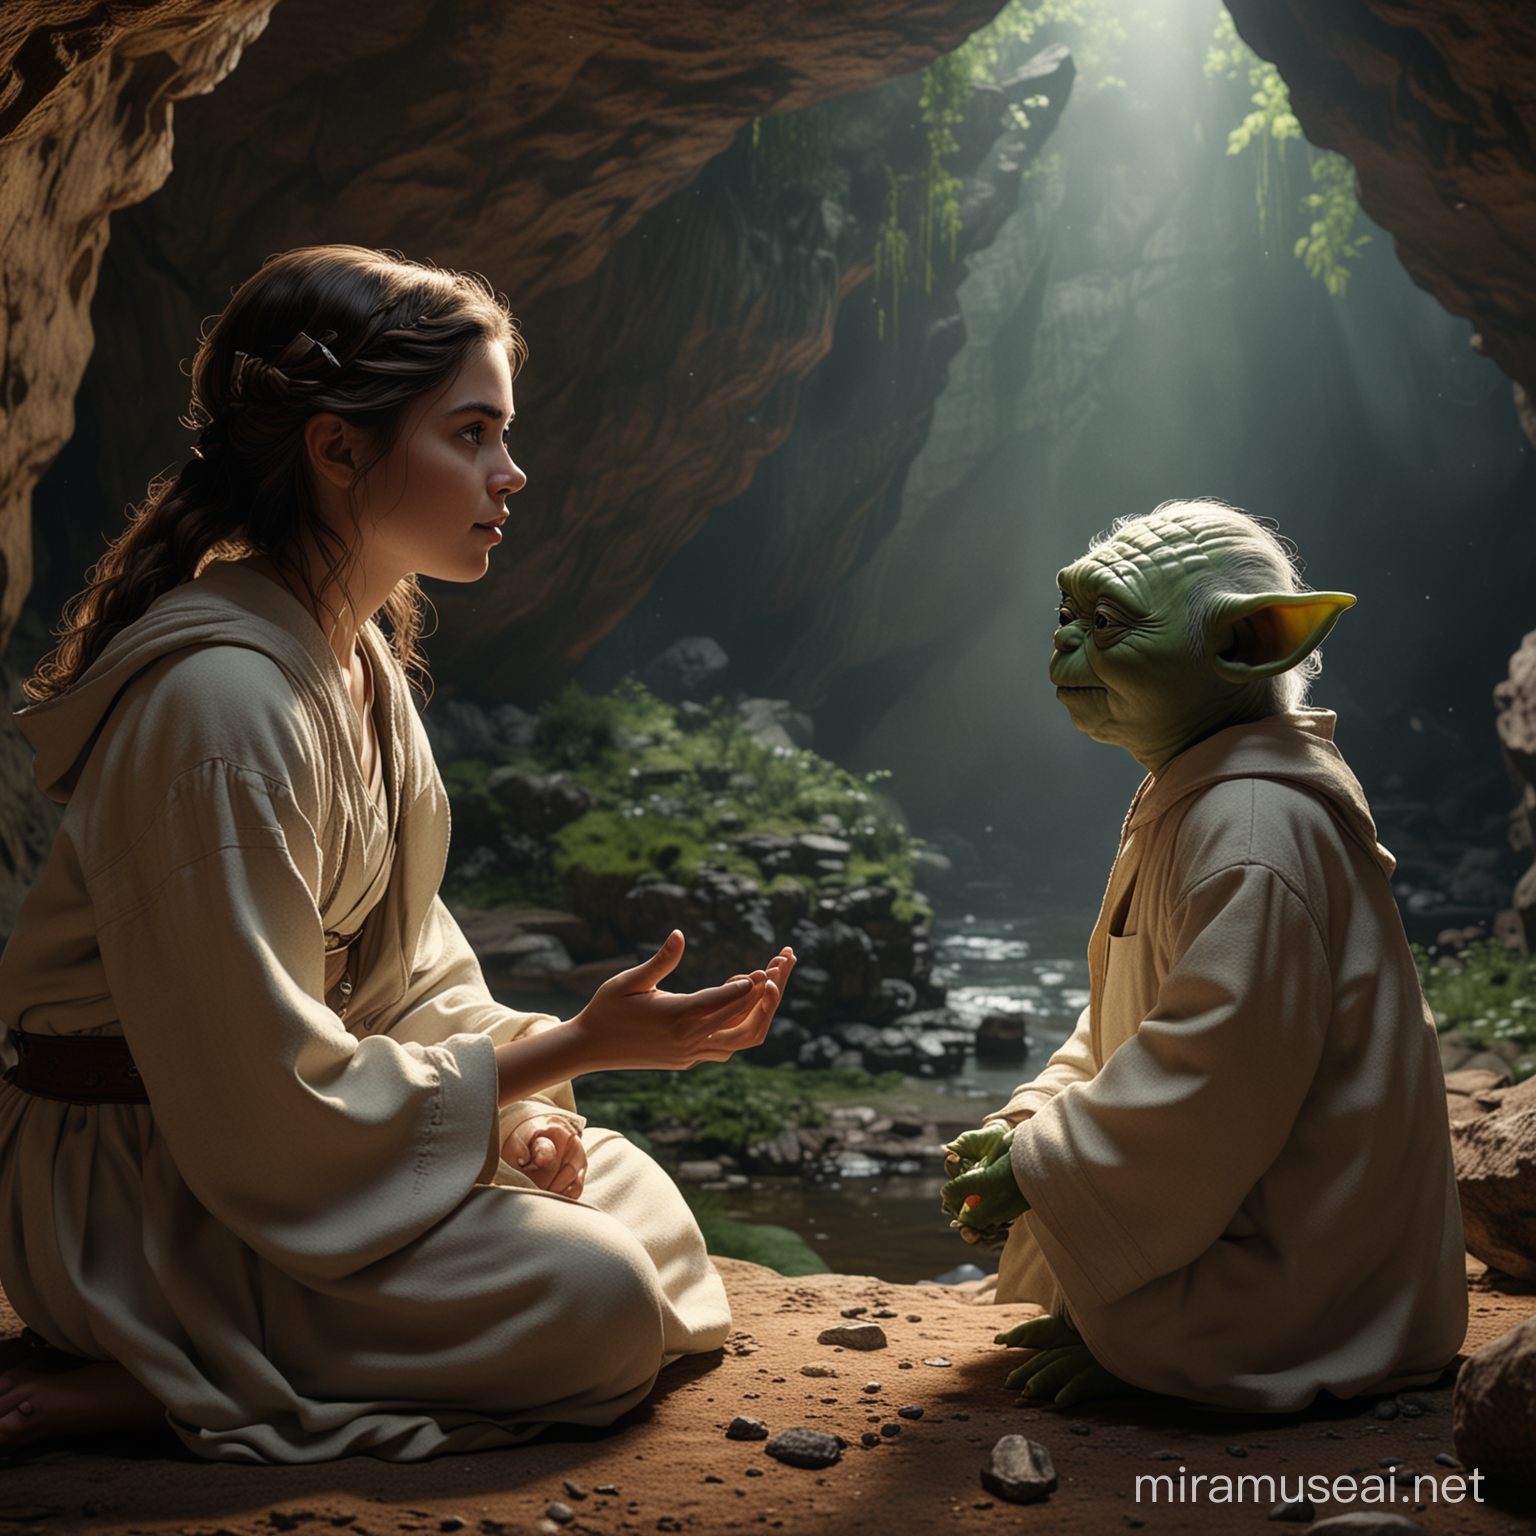 hyper fidelity UHD, realistic, 8k resolution, 16:9 framing, side view, Fujifilm classic chrome simulation, Rembrandt style. a pretty girl asking Yoda a question. background of a cave